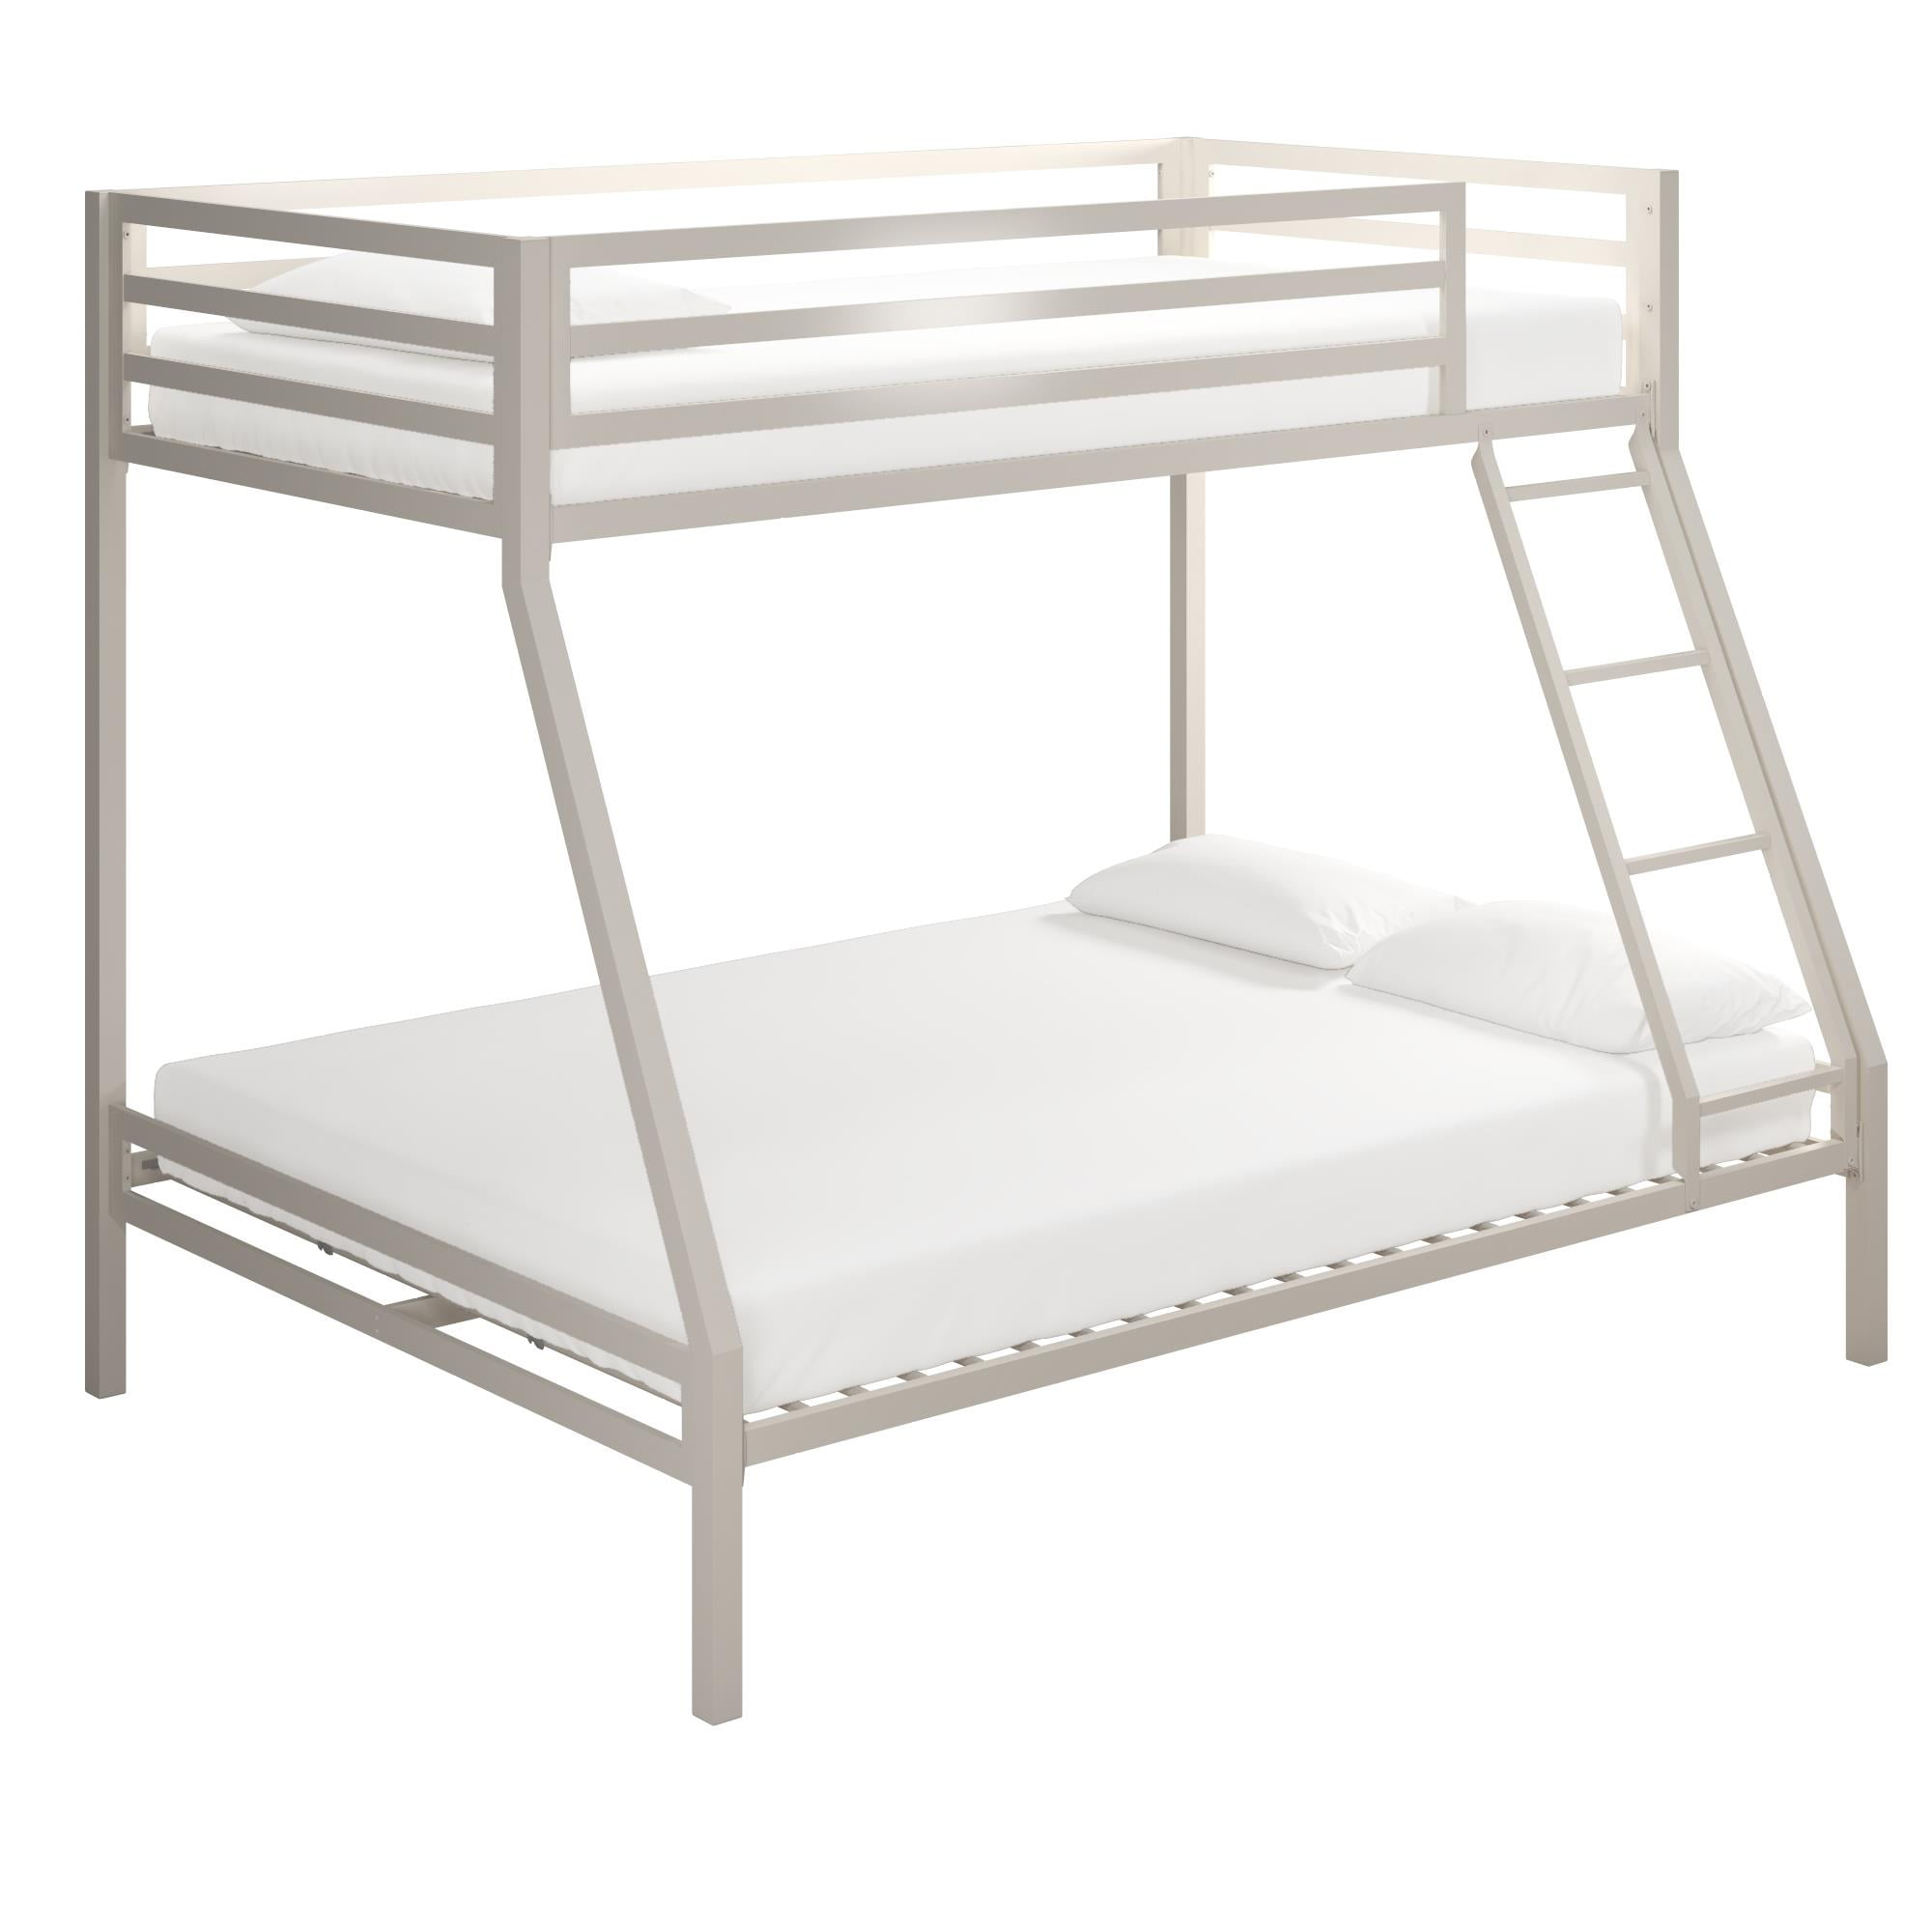 Mainstays Premium Twin Over Full Bunk Bed, Mainstays Twin Over Full Bunk Bed